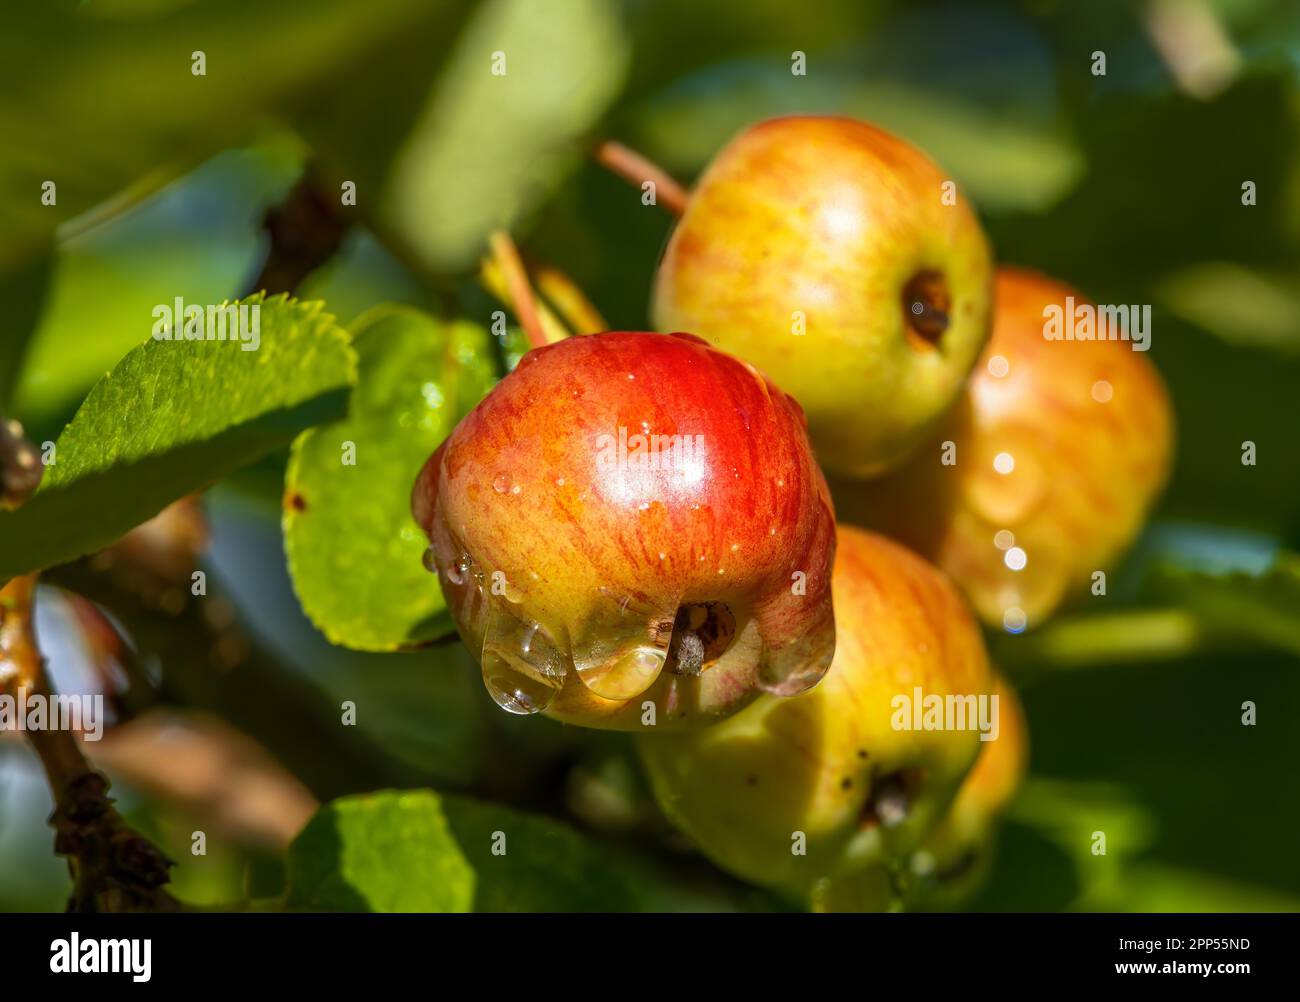 Closeup of ripe apples with raindrops Stock Photo